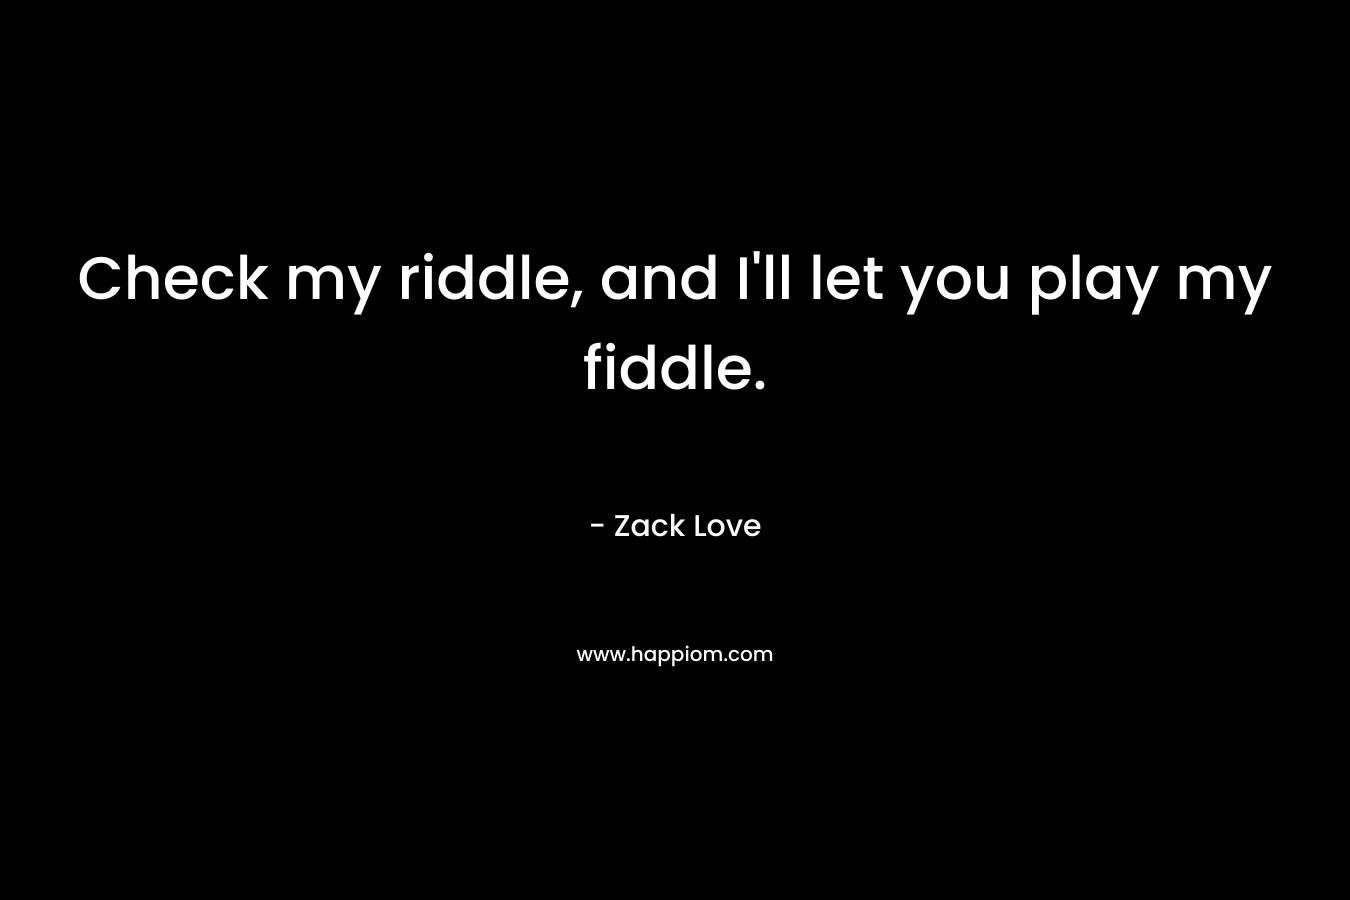 Check my riddle, and I'll let you play my fiddle.